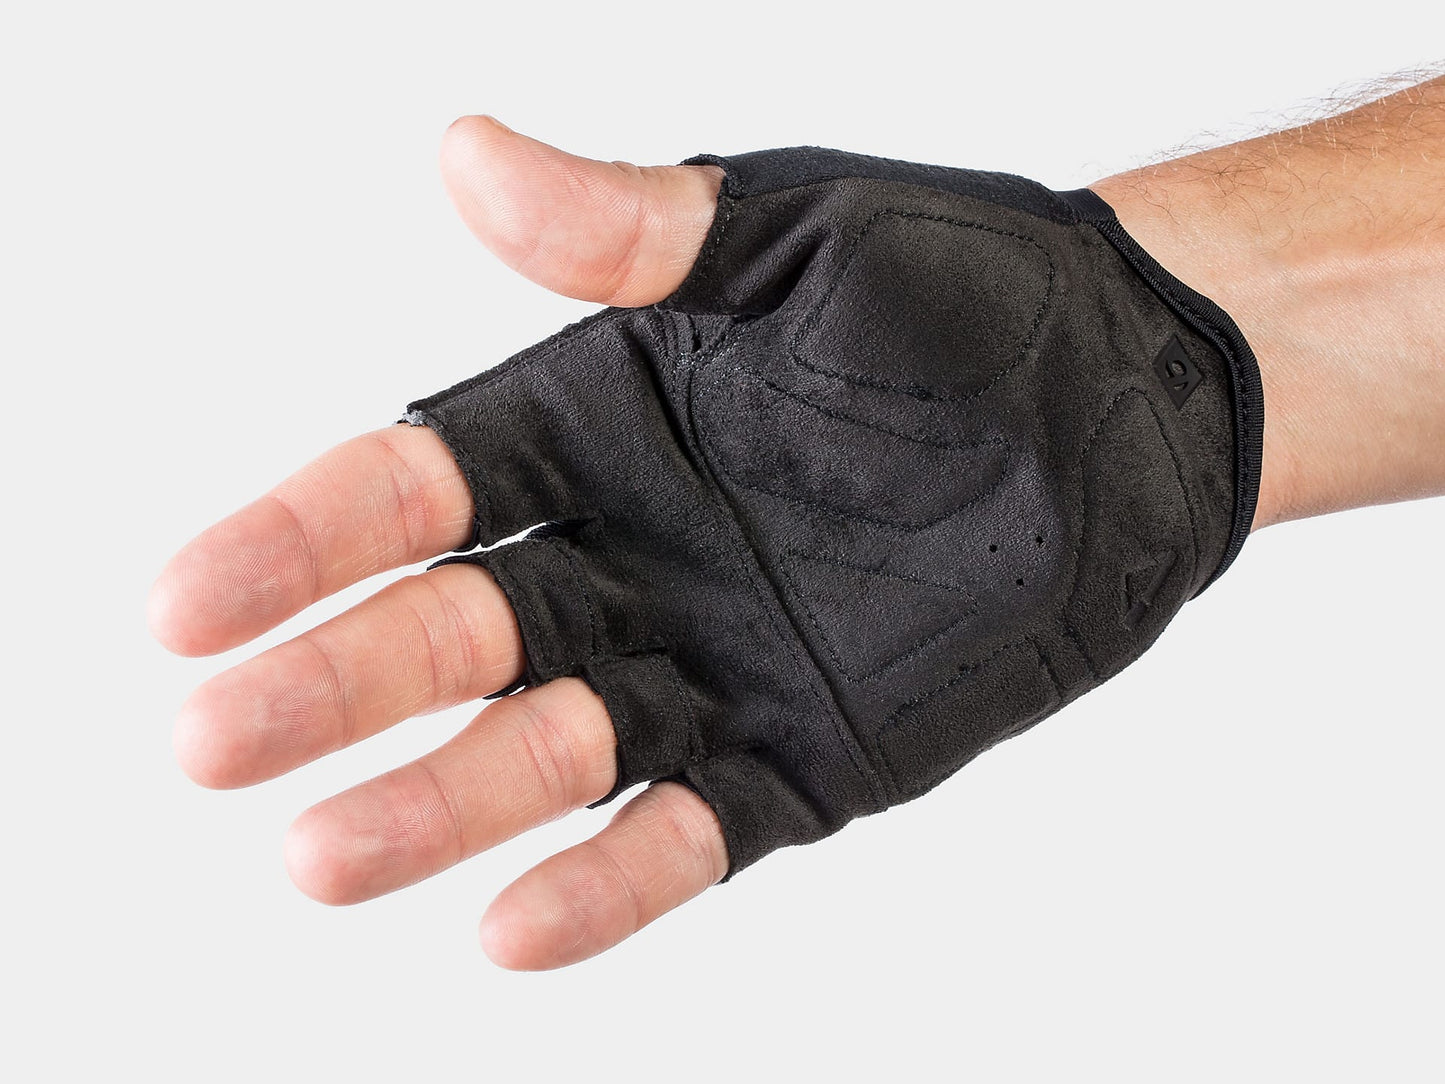 BONTRAGER VELOCIS CYCLING GLOVE